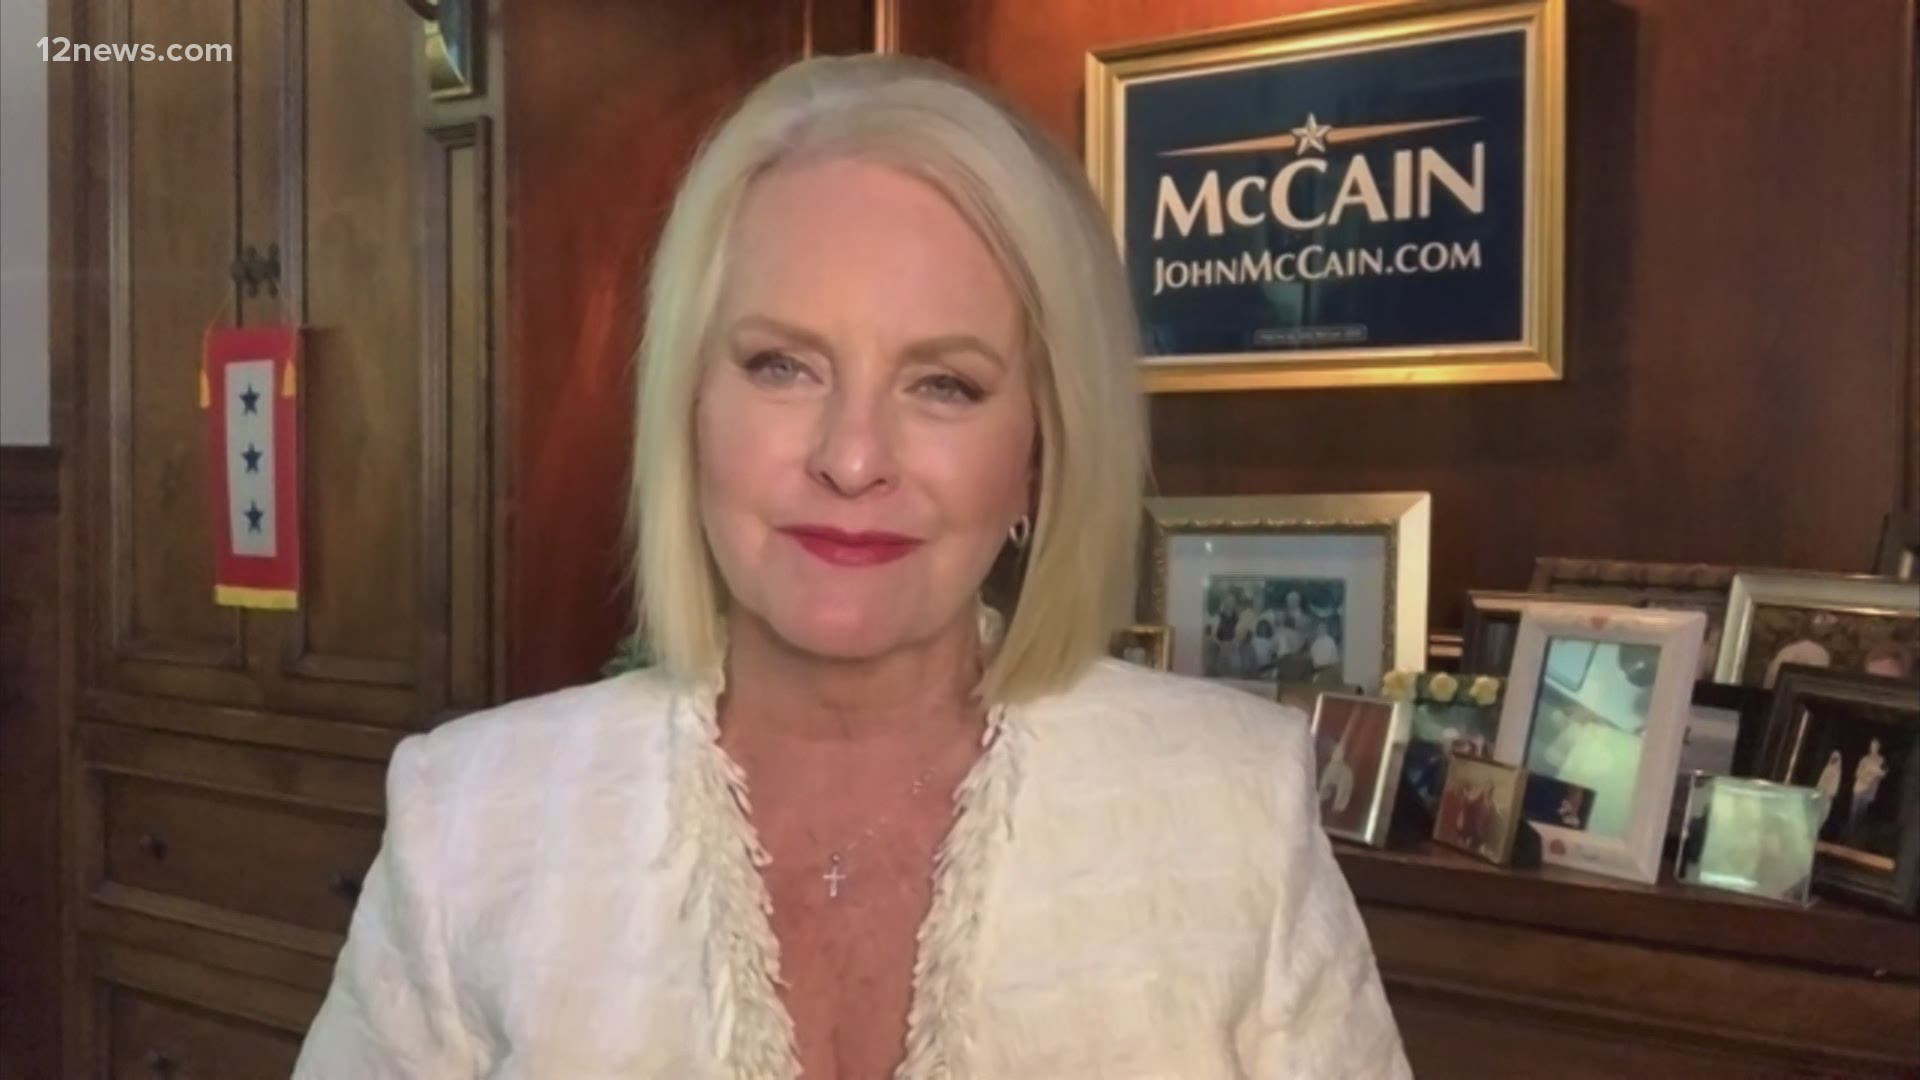 The former wife of the late Arizona senator John McCain shares her hope for unity in the country under a Biden presidency in this segment of Sunday Square Off.